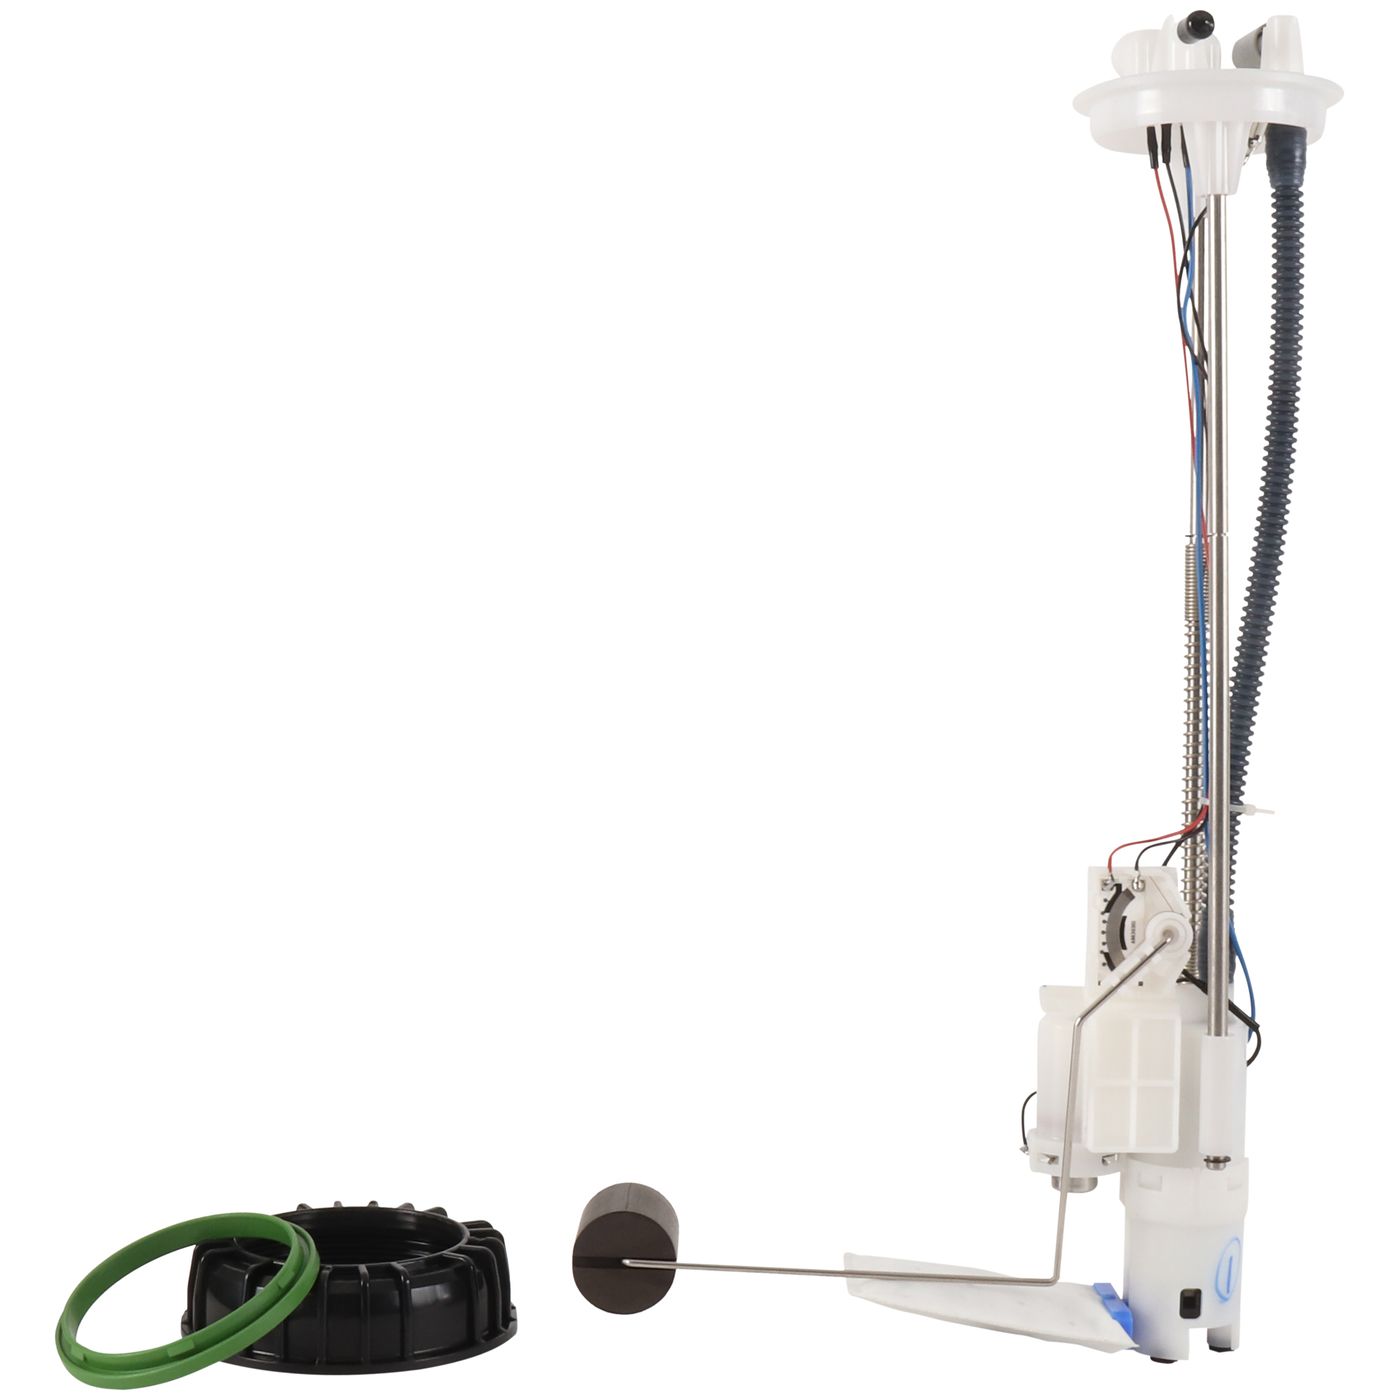 Wrp Fuel Pump Modules - WRP471025 image